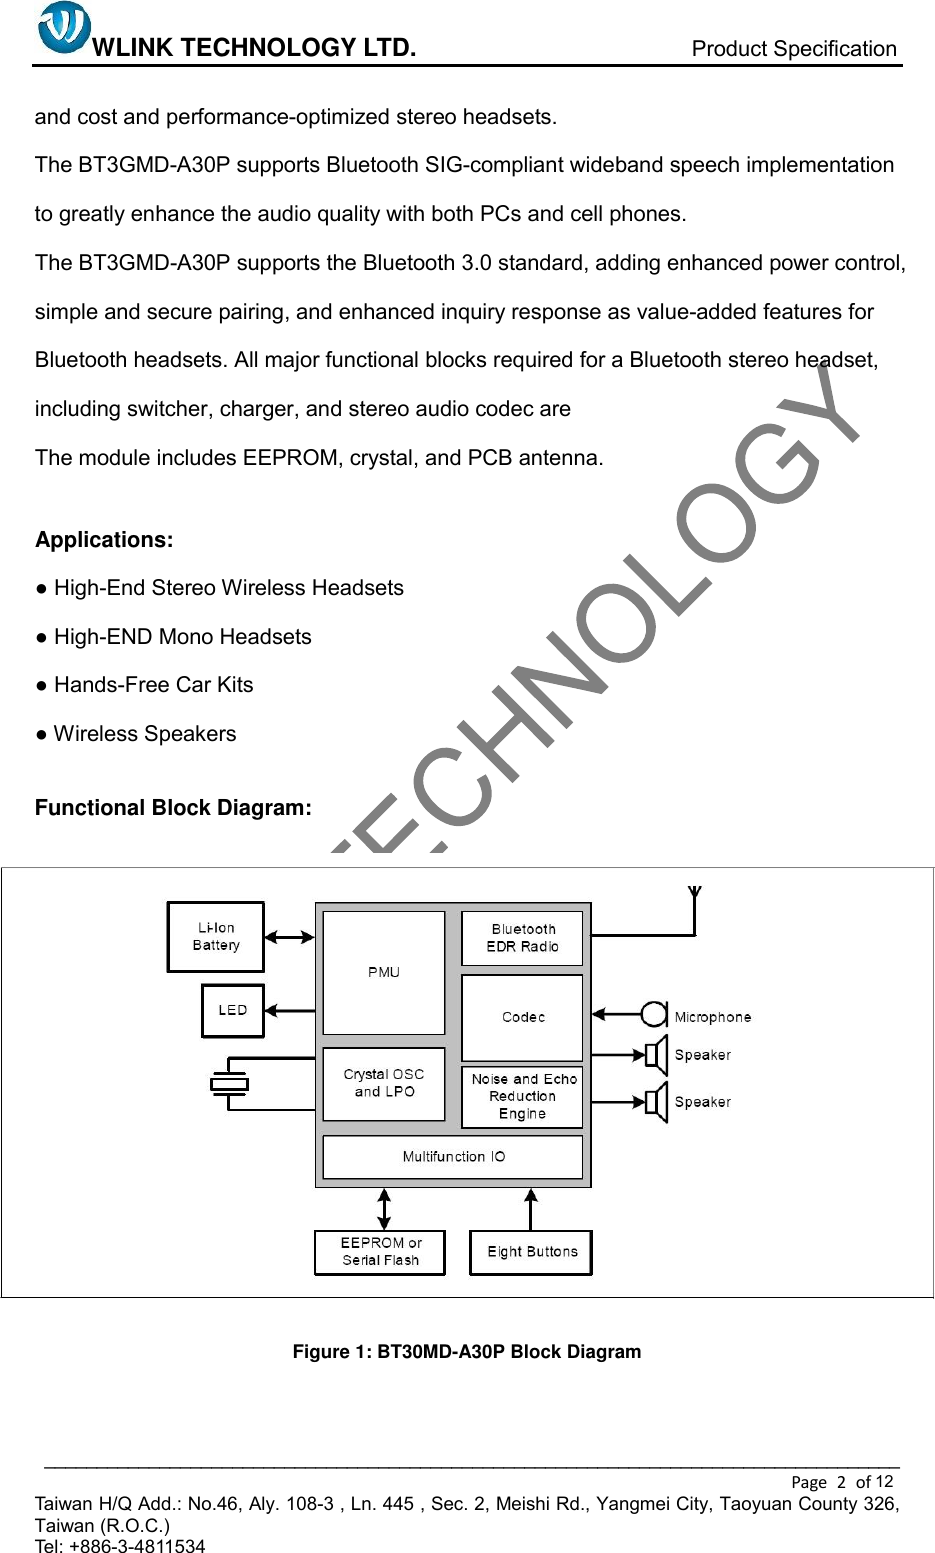 WLINK TECHNOLOGY LTD.                            Product Specification  __________________________________________________________________________________ Page  2  of   Taiwan H/Q Add.: No.46, Aly. 108-3 , Ln. 445 , Sec. 2, Meishi Rd., Yangmei City, Taoyuan County 326, Taiwan (R.O.C.)   Tel: +886-3-4811534   and cost and performance-optimized stereo headsets. The BT3GMD-A30P supports Bluetooth SIG-compliant wideband speech implementation to greatly enhance the audio quality with both PCs and cell phones. The BT3GMD-A30P supports the Bluetooth 3.0 standard, adding enhanced power control, simple and secure pairing, and enhanced inquiry response as value-added features for Bluetooth headsets. All major functional blocks required for a Bluetooth stereo headset, including switcher, charger, and stereo audio codec are   The module includes EEPROM, crystal, and PCB antenna.  Applications: ● High-End Stereo Wireless Headsets ● High-END Mono Headsets ● Hands-Free Car Kits ● Wireless Speakers  Functional Block Diagram:                 Figure 1: BT30MD-A30P Block Diagram   12